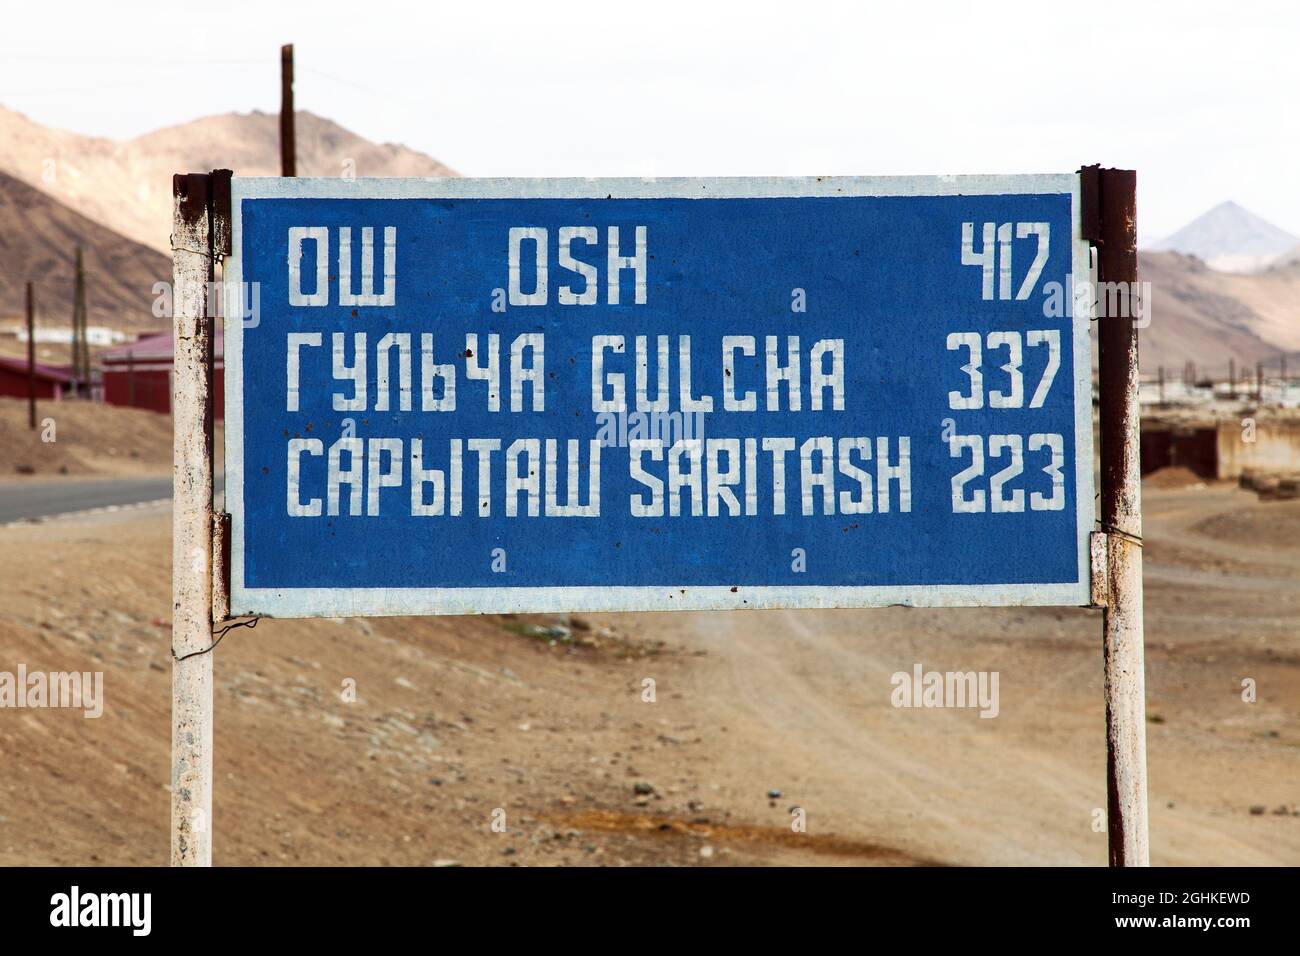 Signpost with distance to three town in cyrillic and roman - 'Osh' 'Gulcha' and 'Saritash' - Pamir highway or Pamirskij trakt, Kyrgyzstan and Tajikist Stock Photo